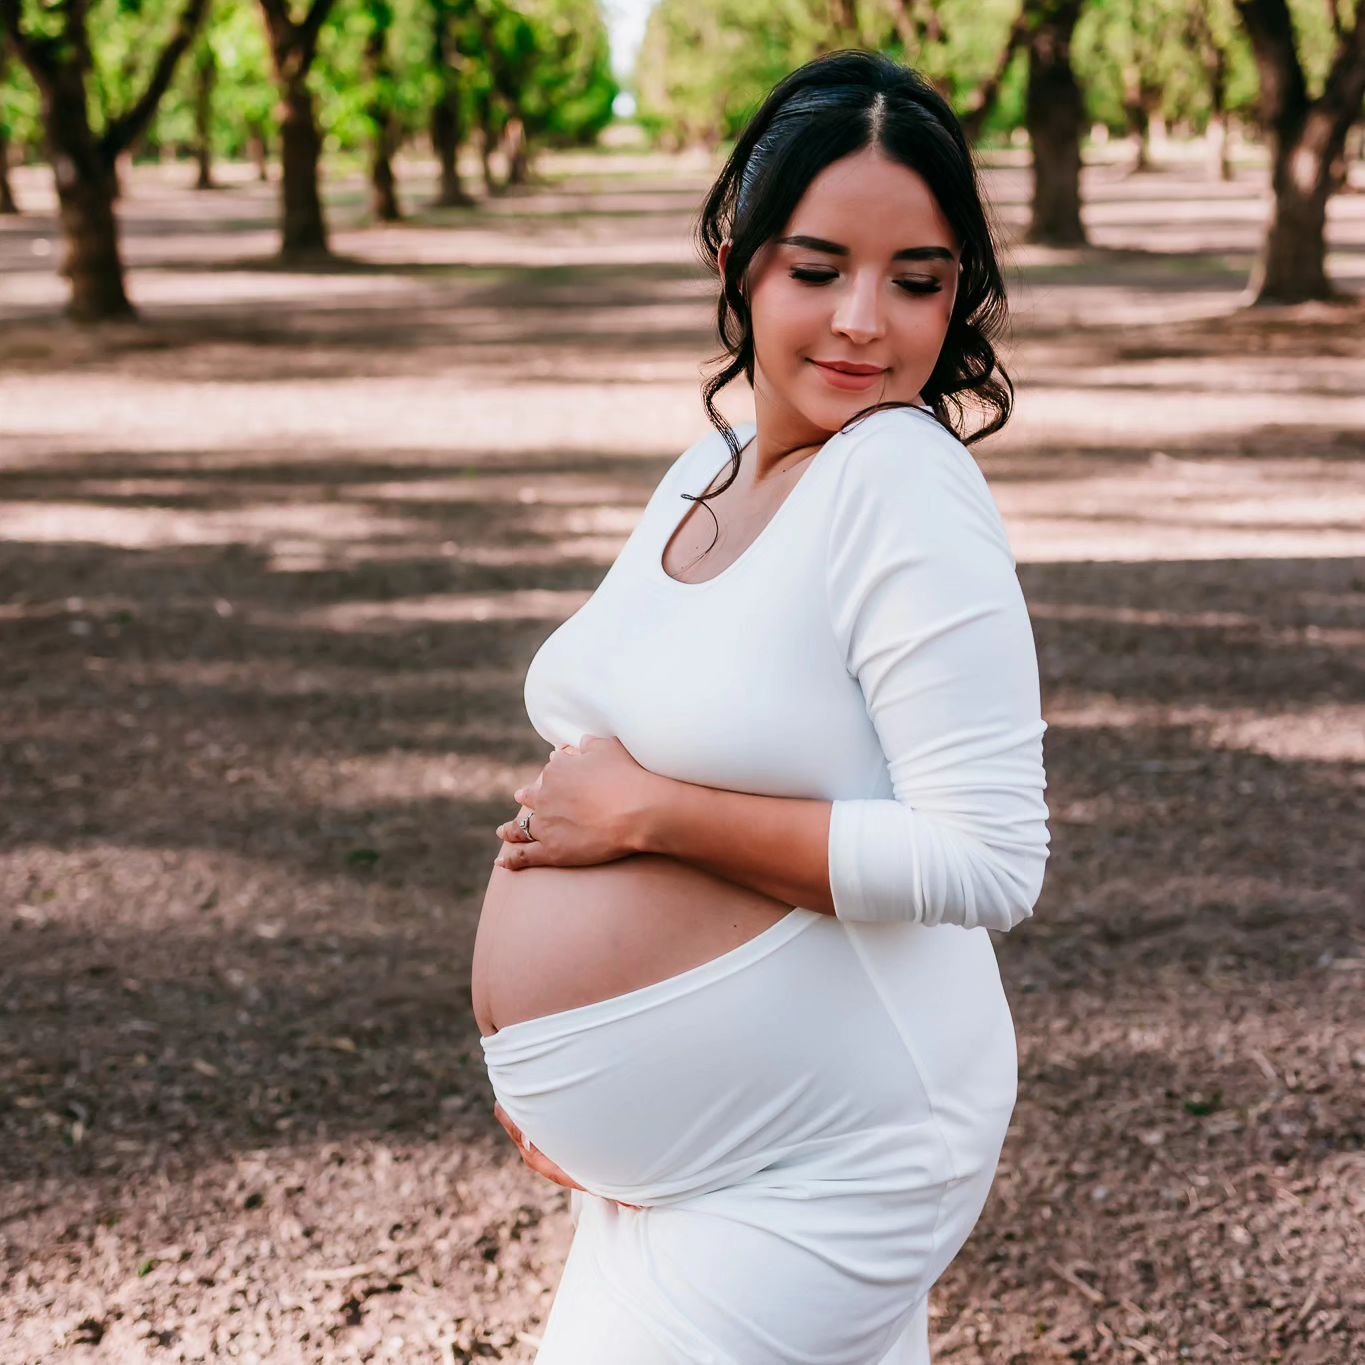 Are you an expecting mama or do you know one? Have you thought about Maternity photos yet?? Well you should! ✨

When should you book your maternity session?

I always recommend scheduling your maternity session for when you are around 30-34 weeks. I 